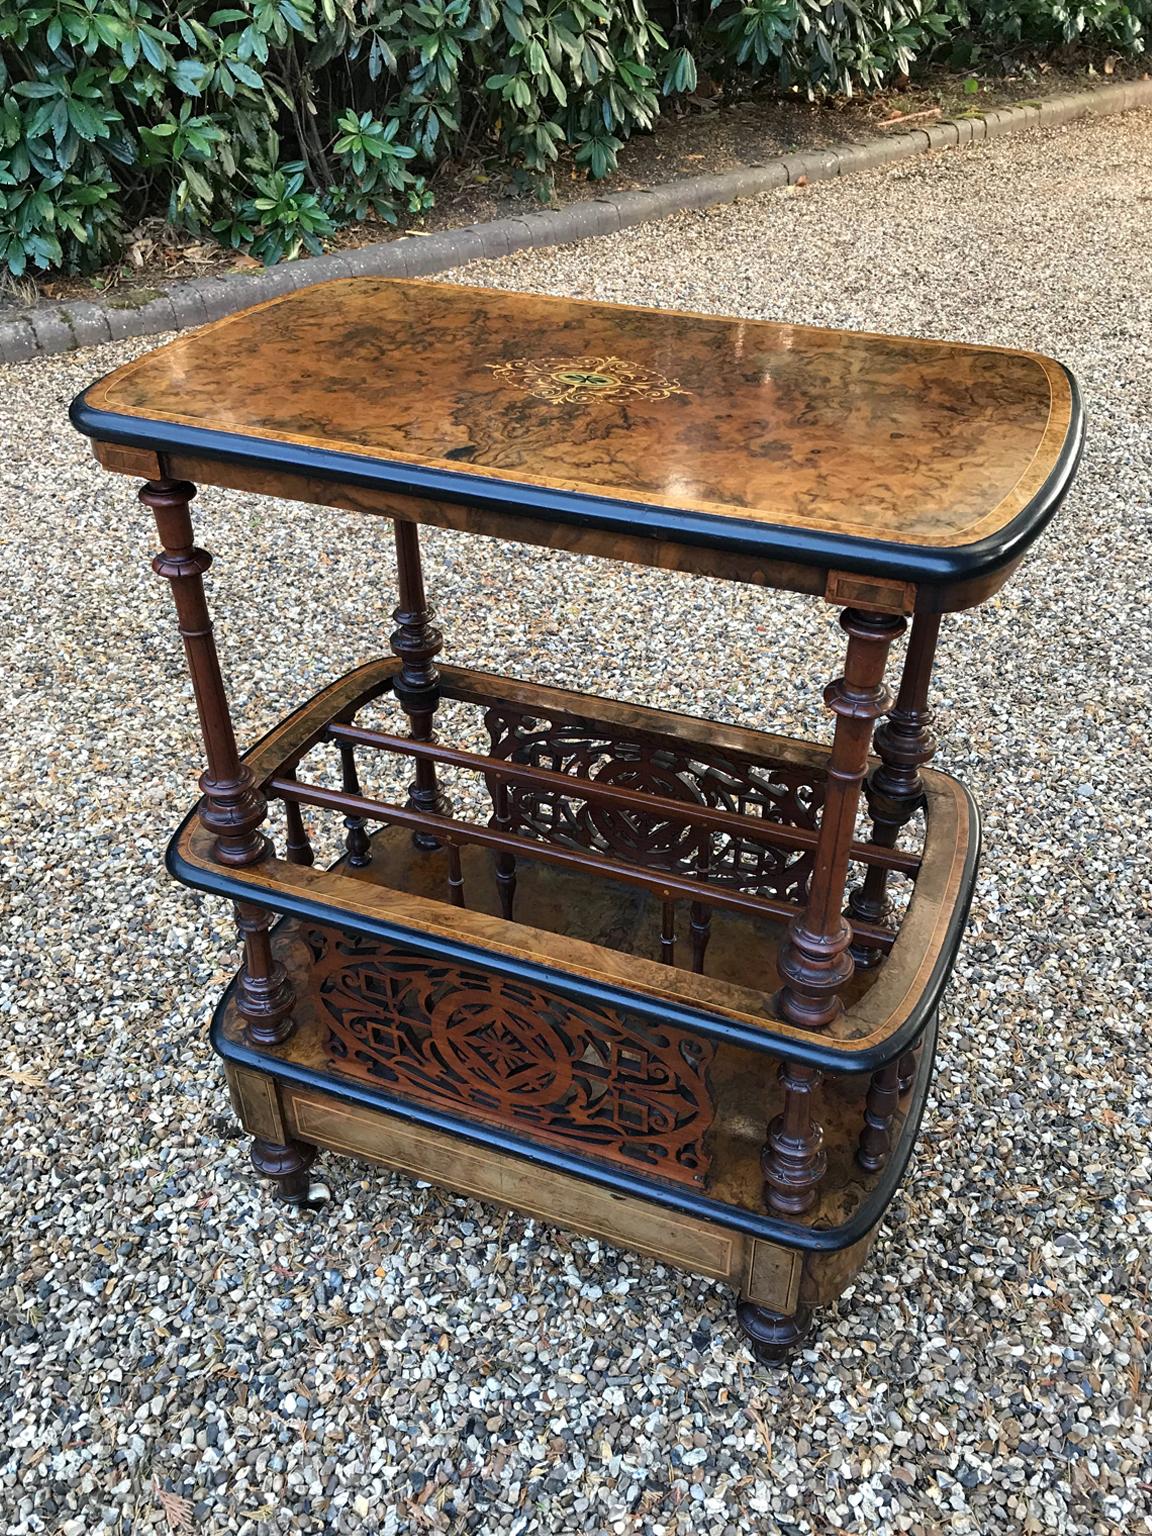 19th century burr walnut and marquetry inlaid Canterbury, base has a single drawer on turned feet and original white china castors,
circa 1840
Dimensions:
Width: 27 inches – 69 cms
Depth: 16 inches – 40 cms
Height: 34.5 inches – 88 cms.
 